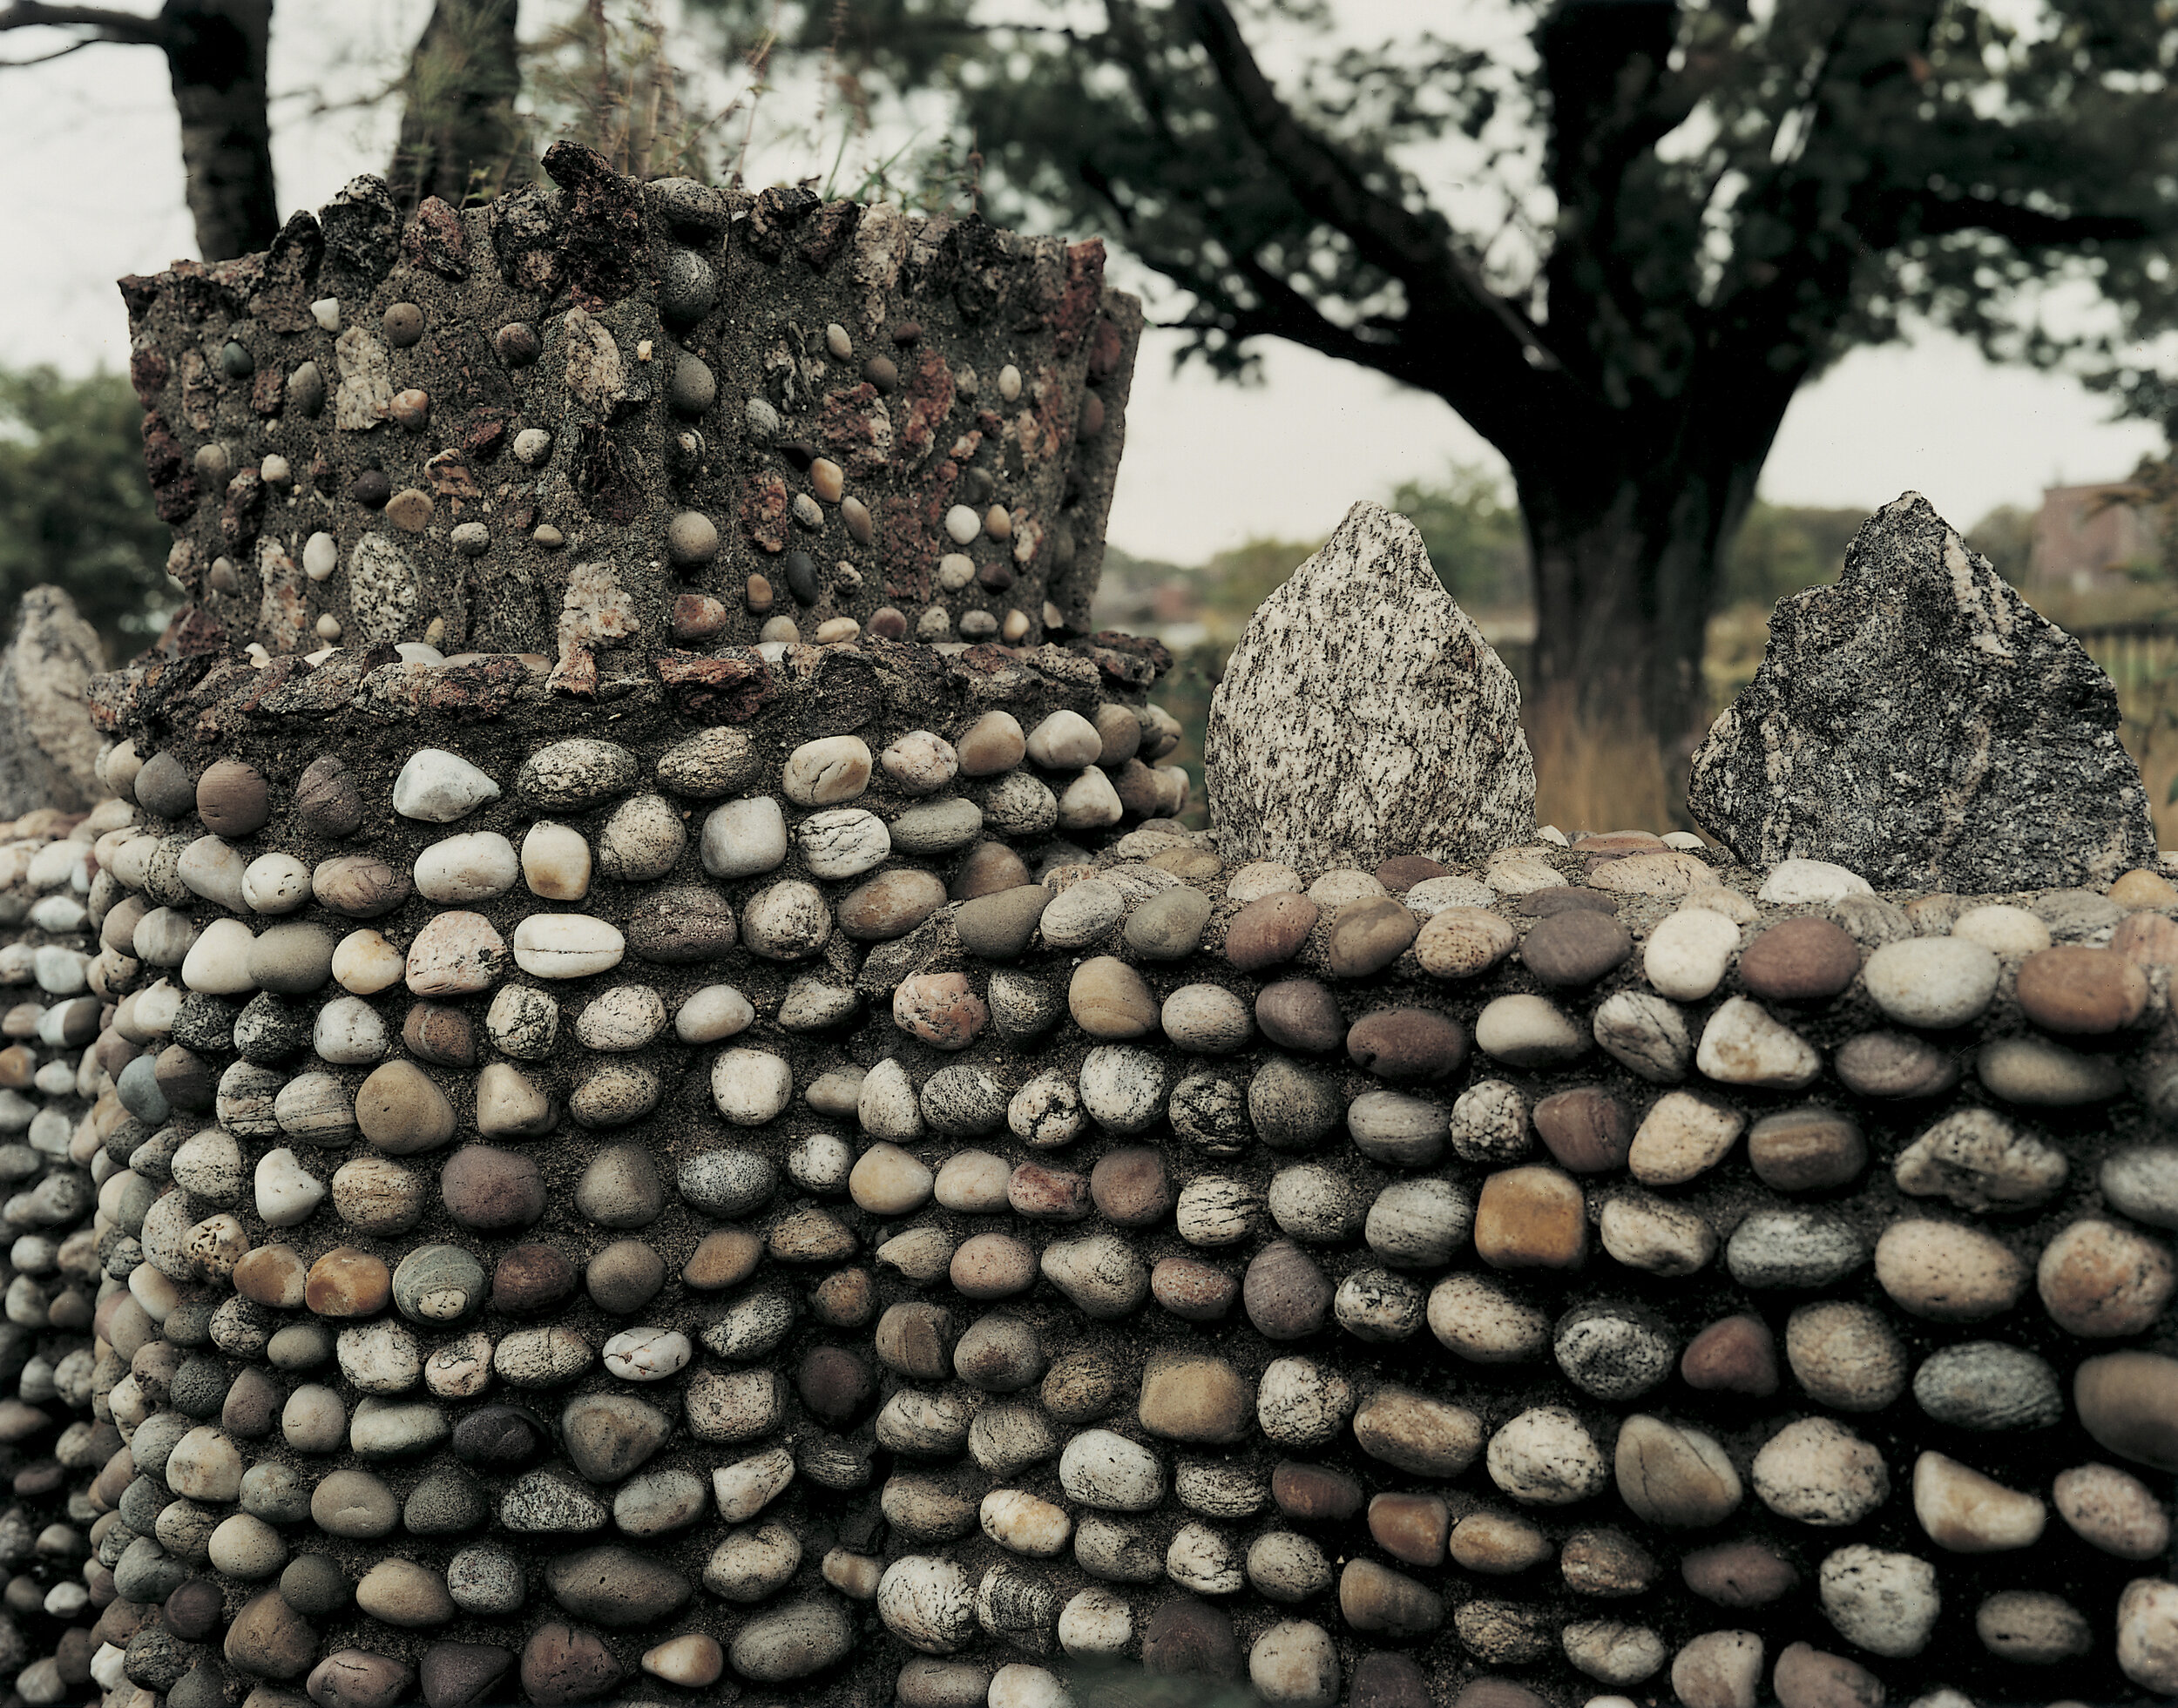 A wall made of river stones, Cemetery for Union Soldiers, November 1991